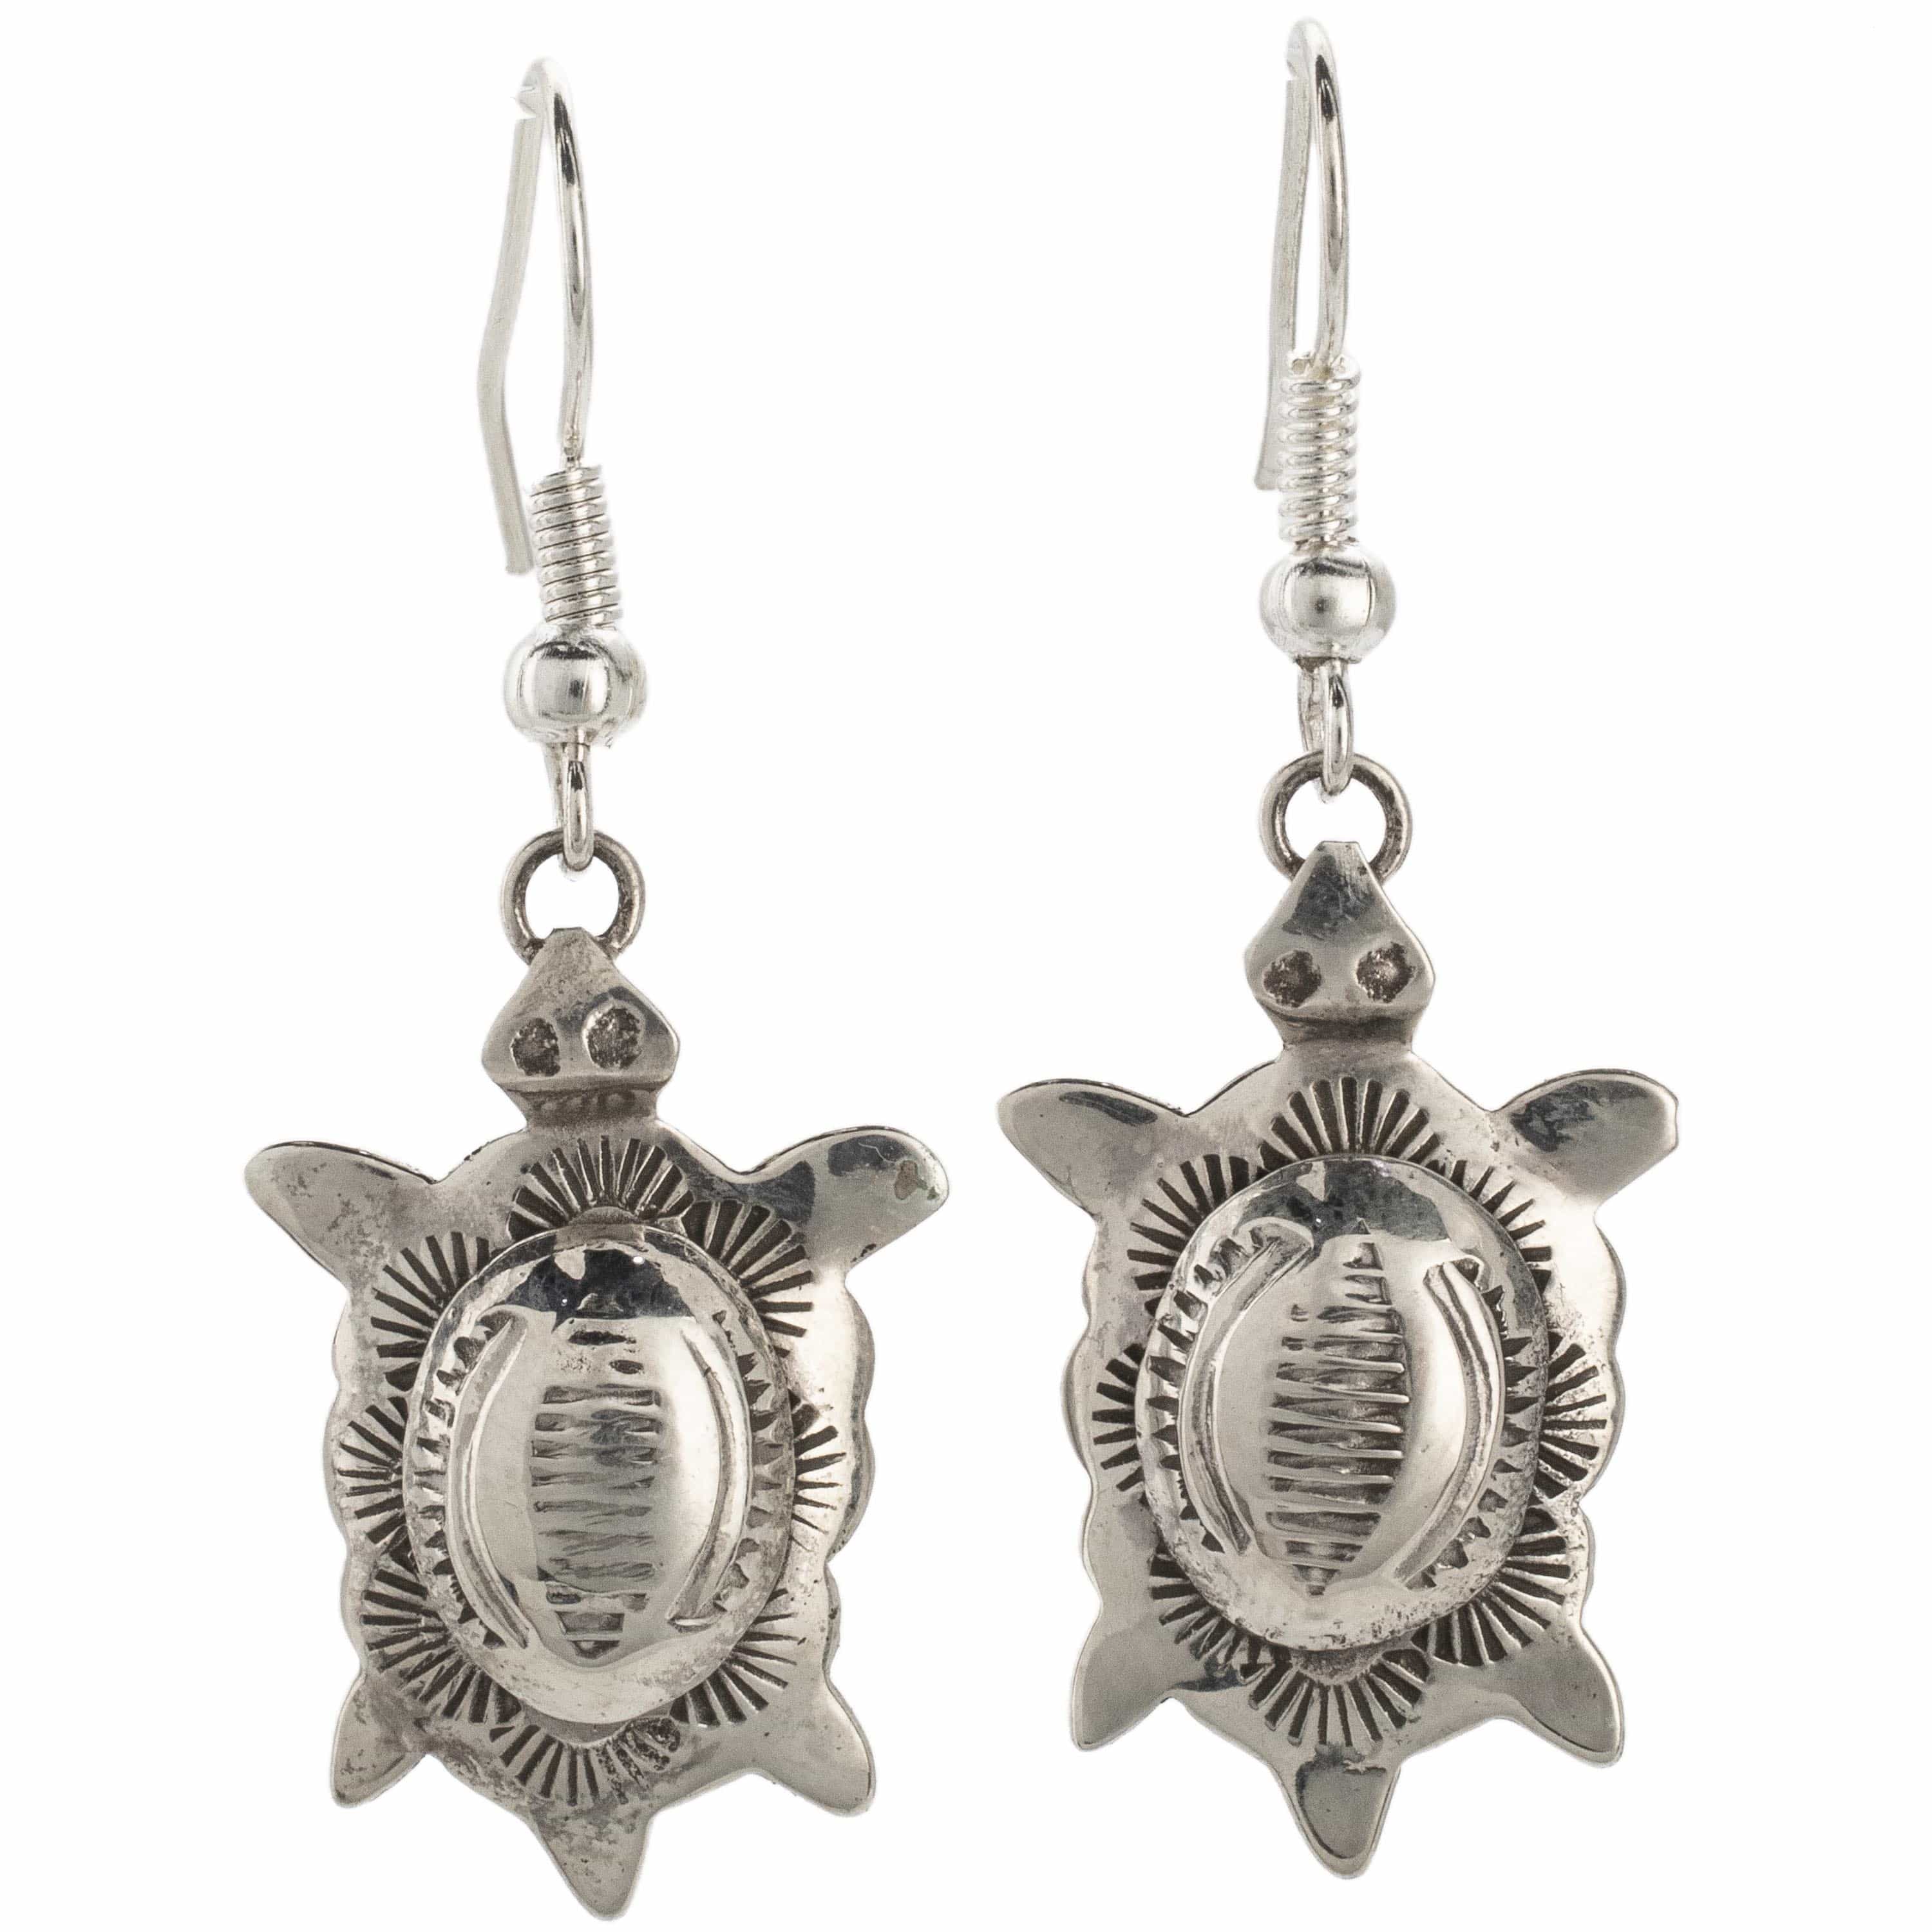 Kalifano Native American Jewelry Turtle USA Native American Made Sterling Silver Earrings NAE200.004